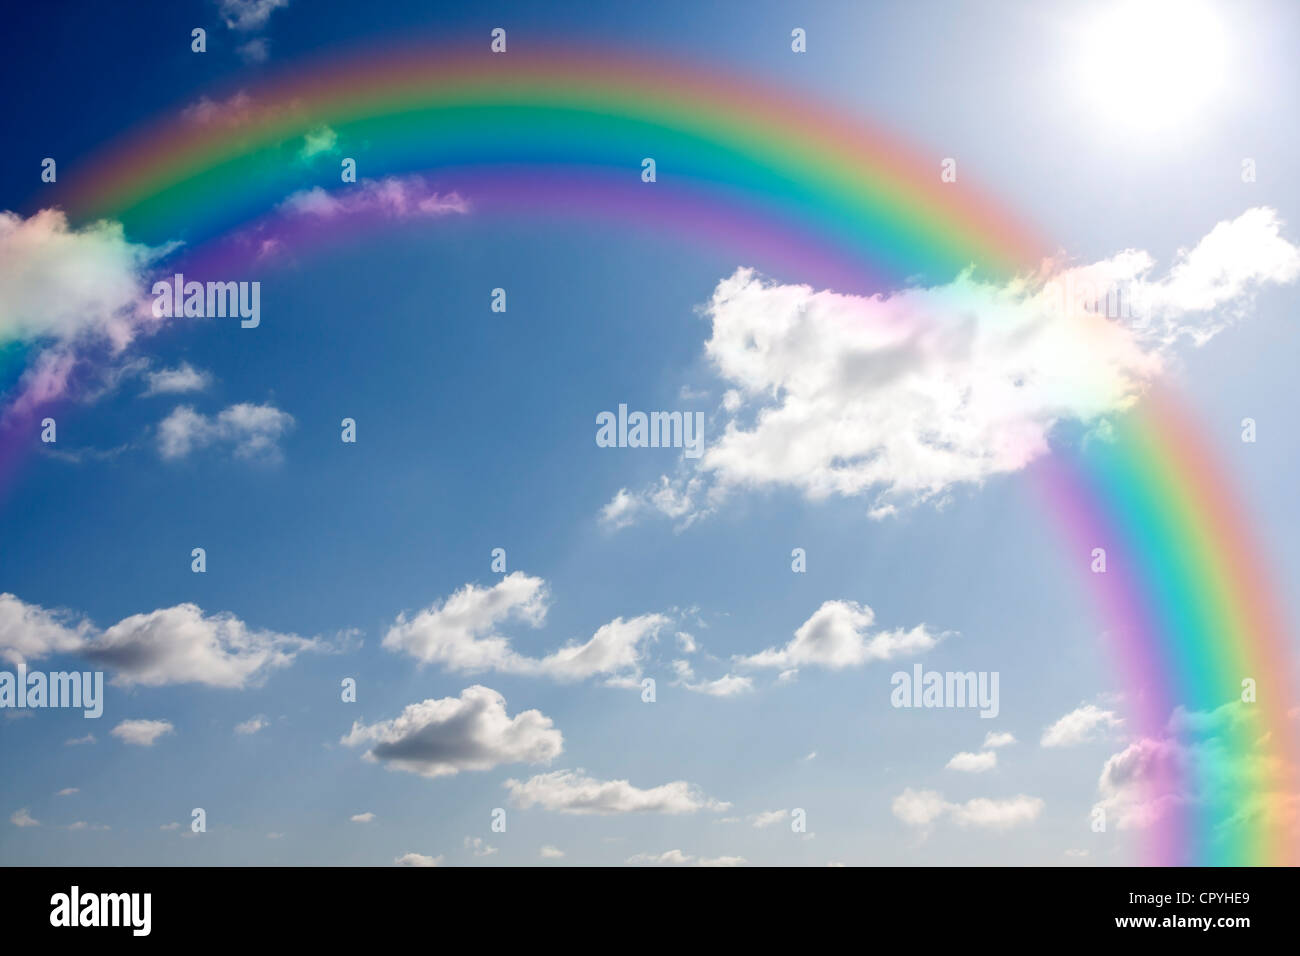 Rainbow and sun against blue sky with clouds Stock Photo